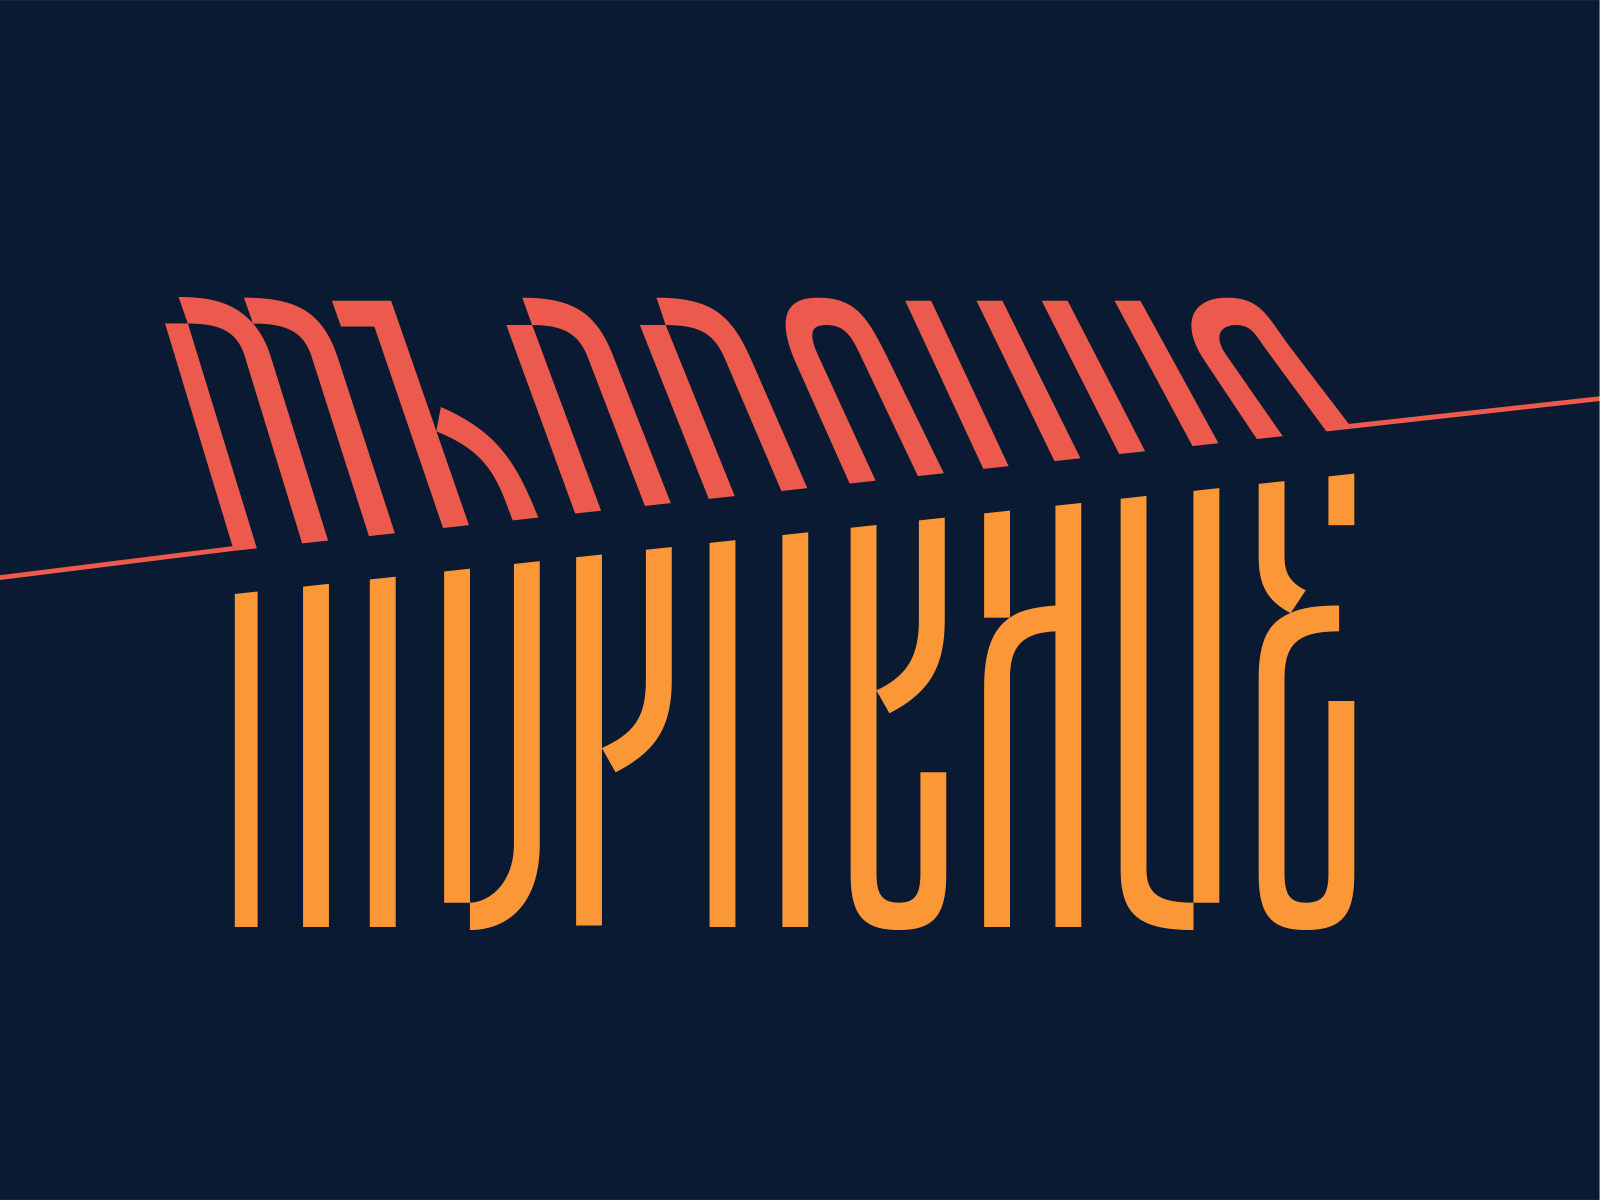 Patience bezierclub brush calligraphy cyrillic handmade lettercollective lettering typography vector